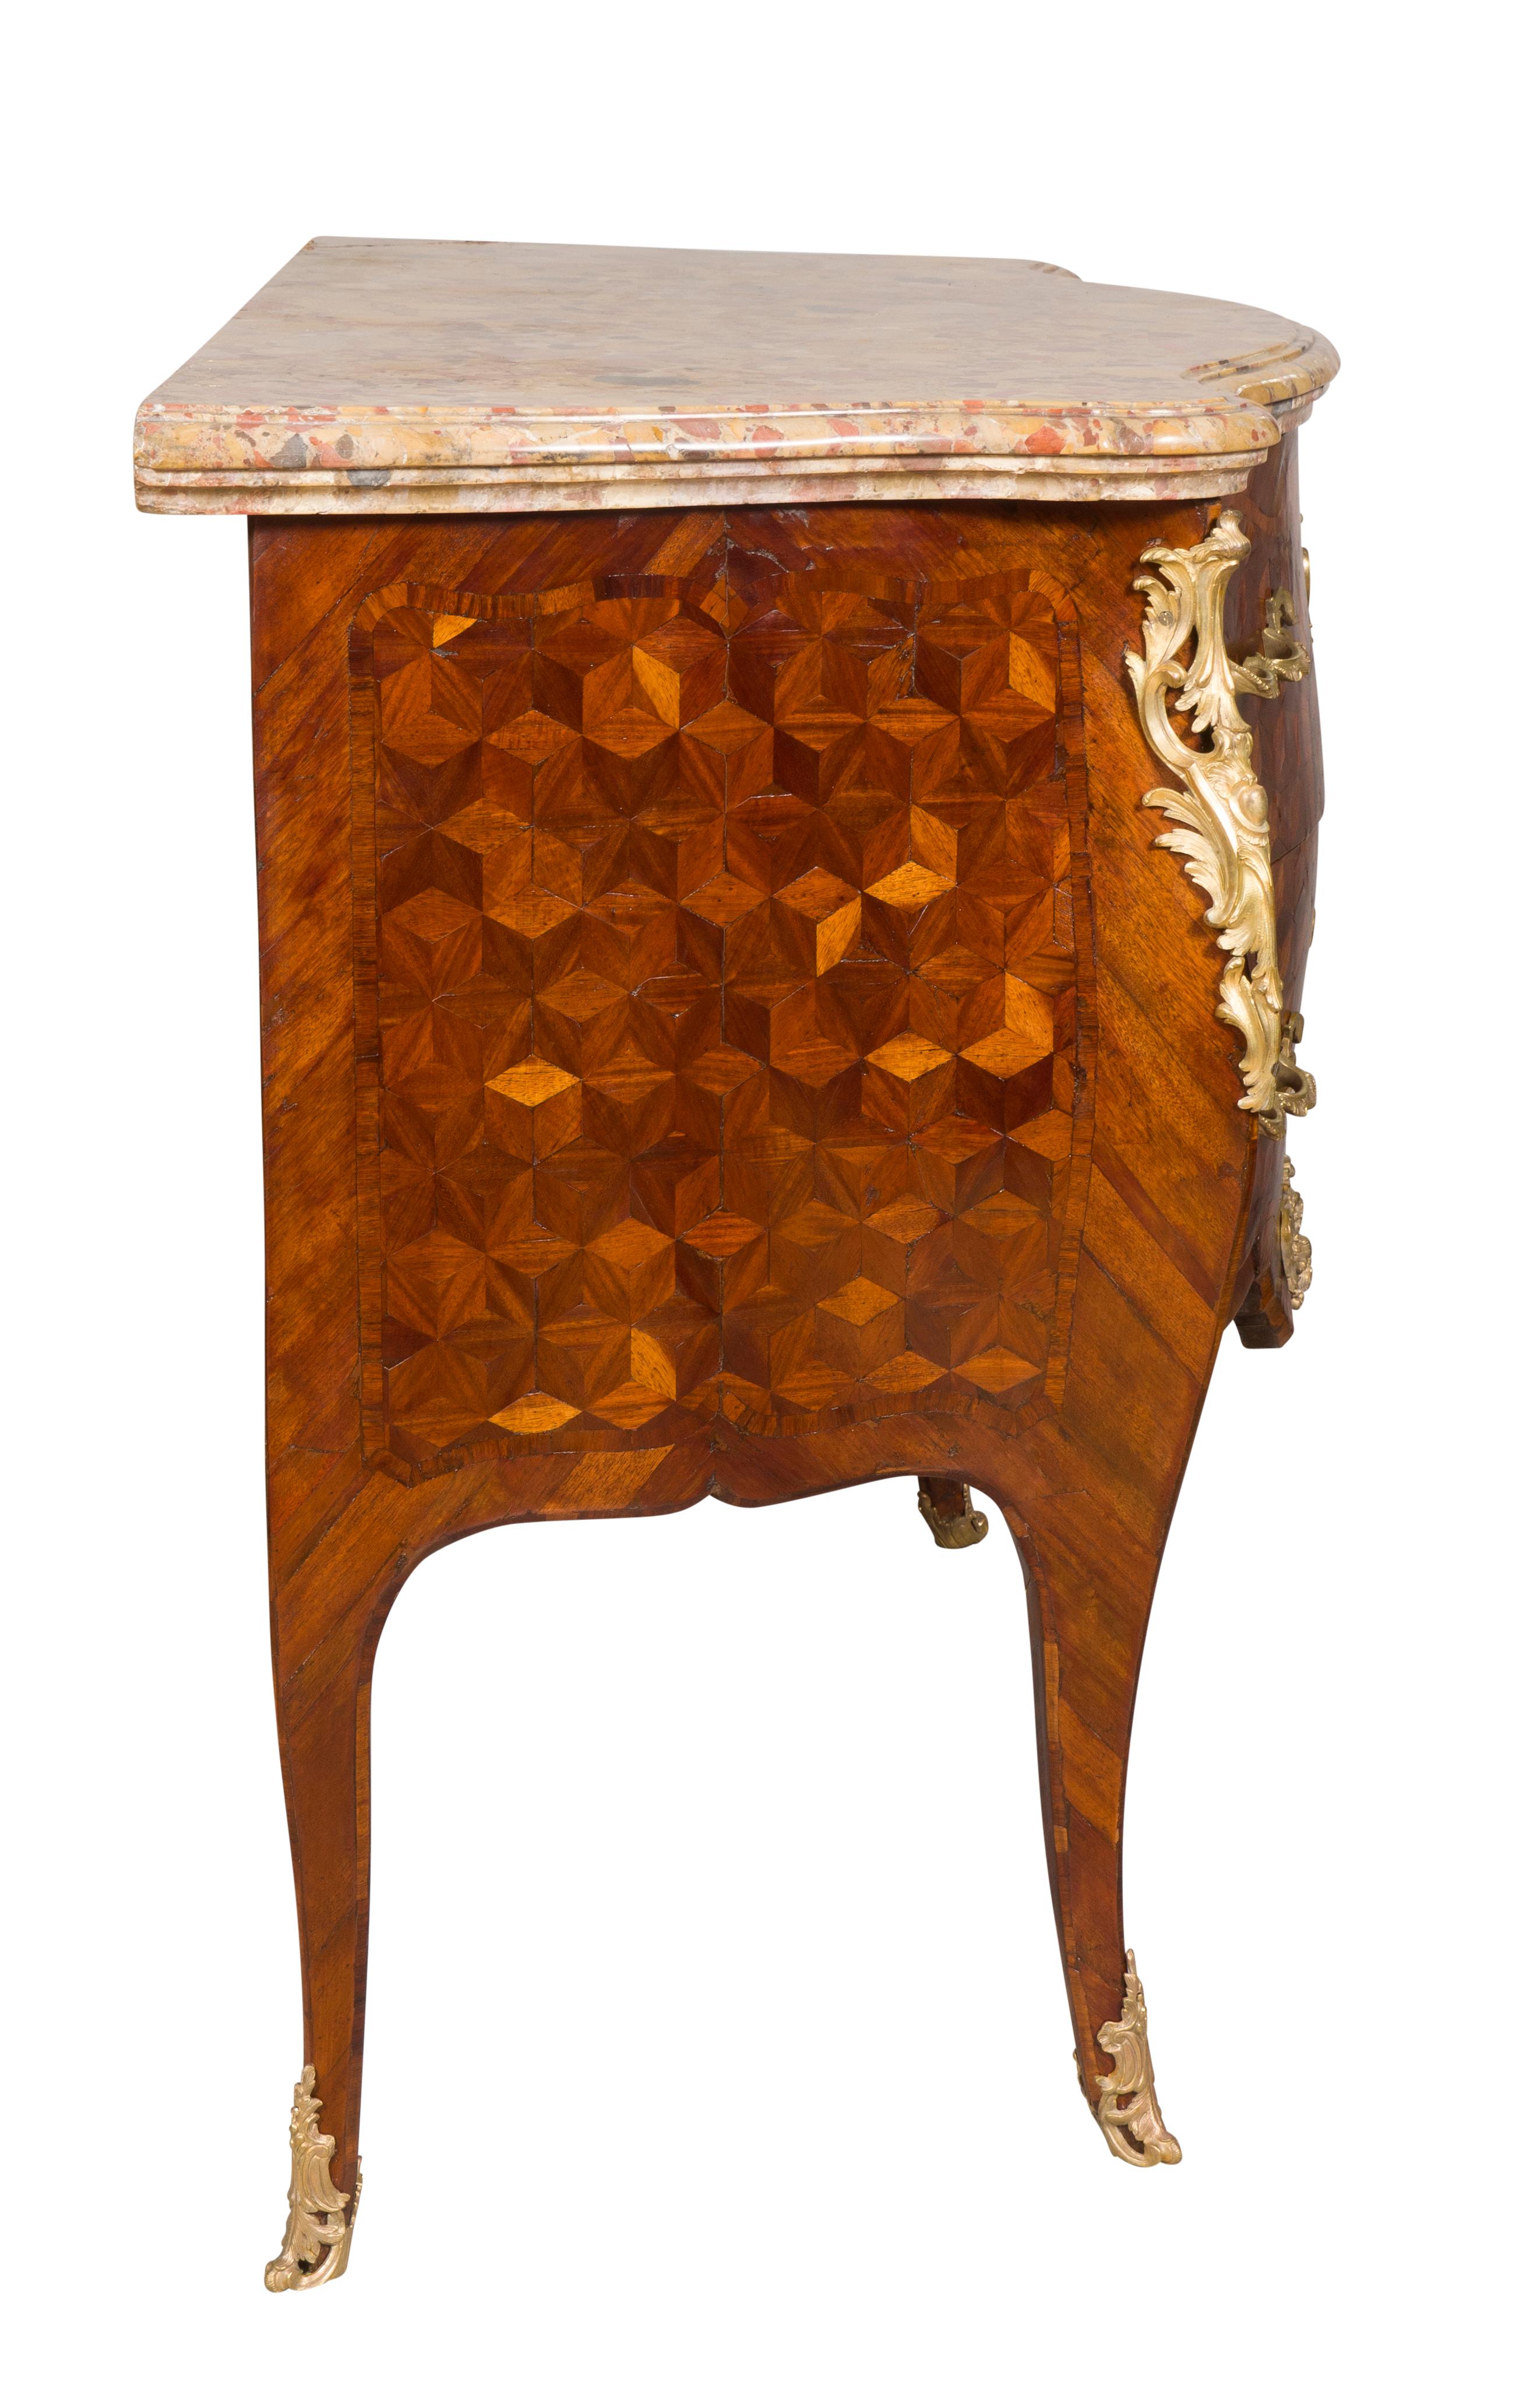 Louis XV Tulipwood and Parquetry Commode In Good Condition For Sale In Essex, MA